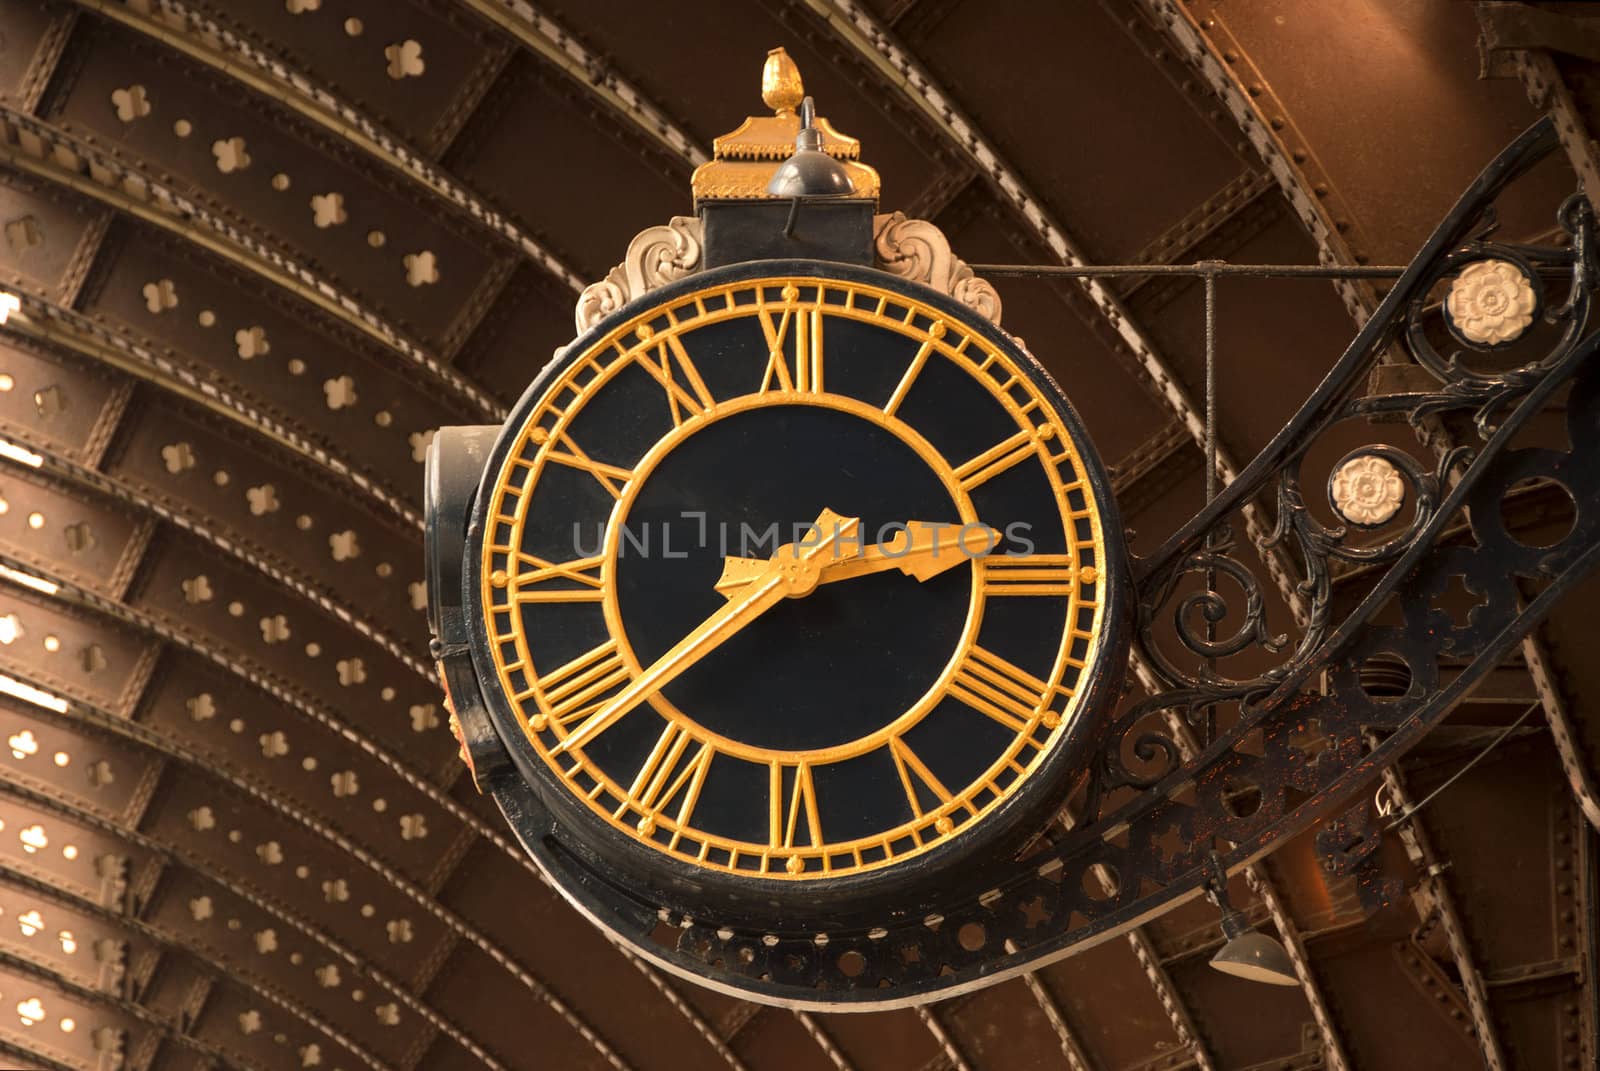 Antique Railway Station Clock by d40xboy